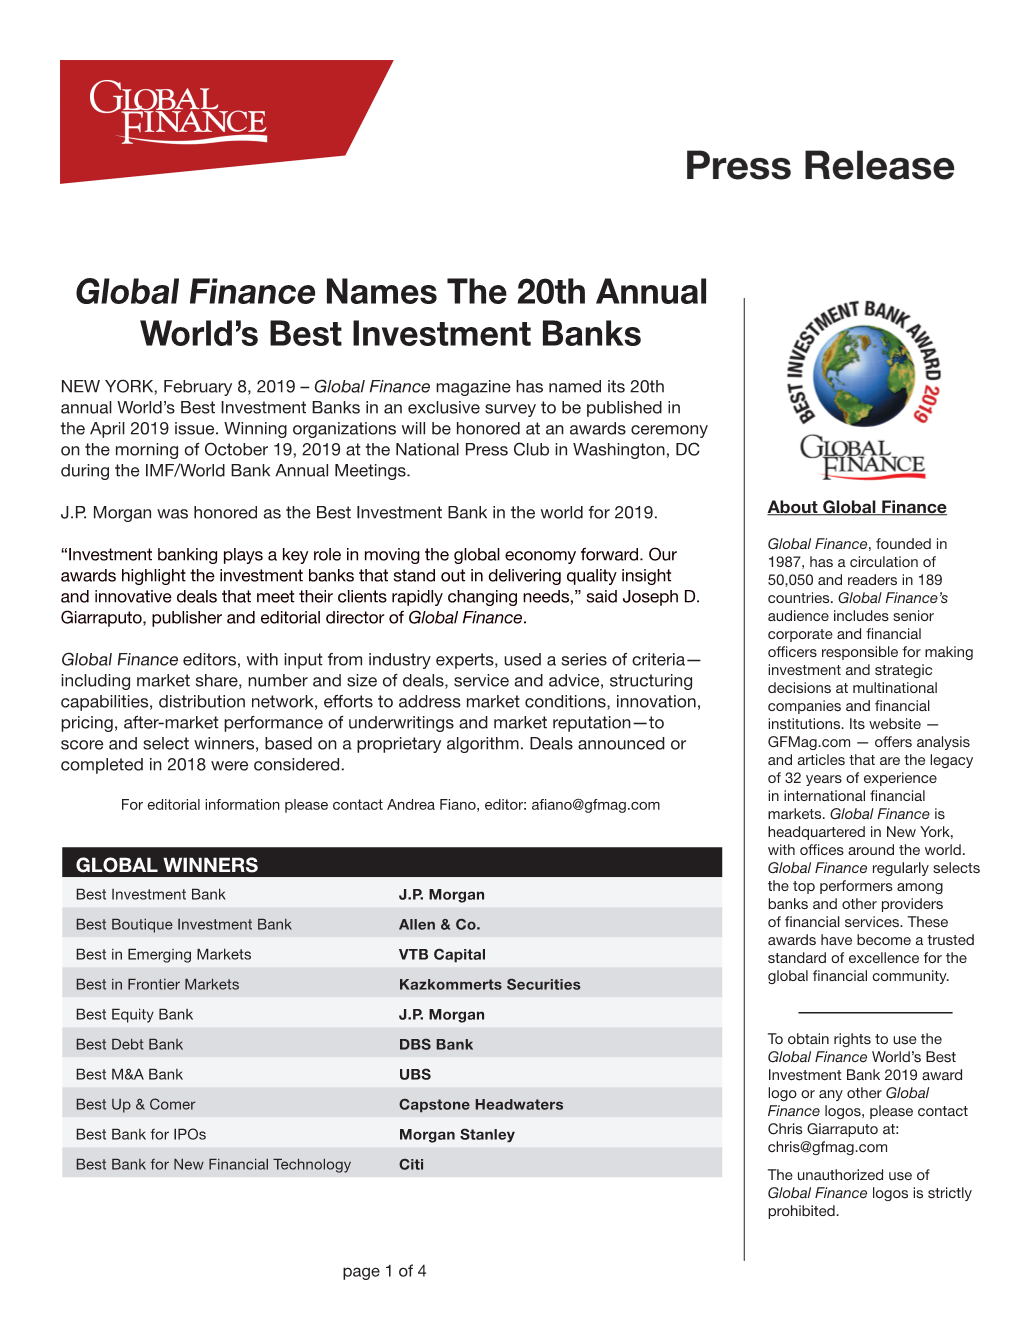 Global Finance Names the World's Best Investment Banks 2019